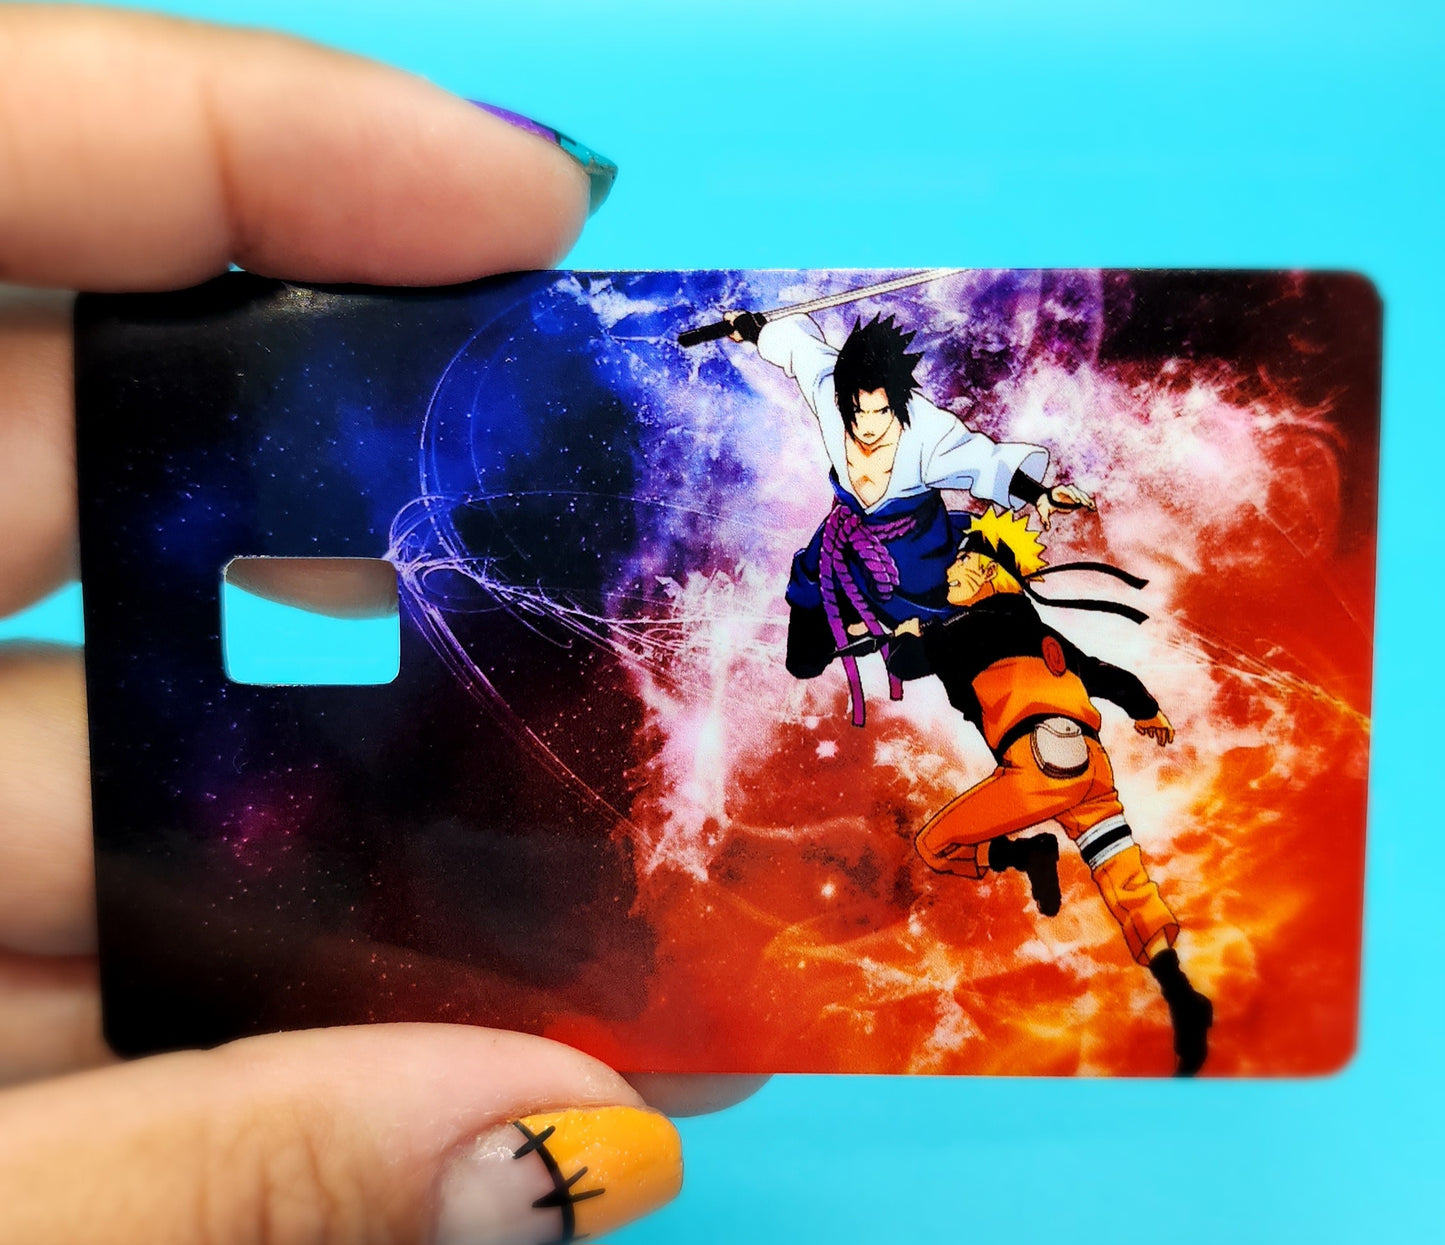 Anime (Naruto) inspired Credit card skin/covers